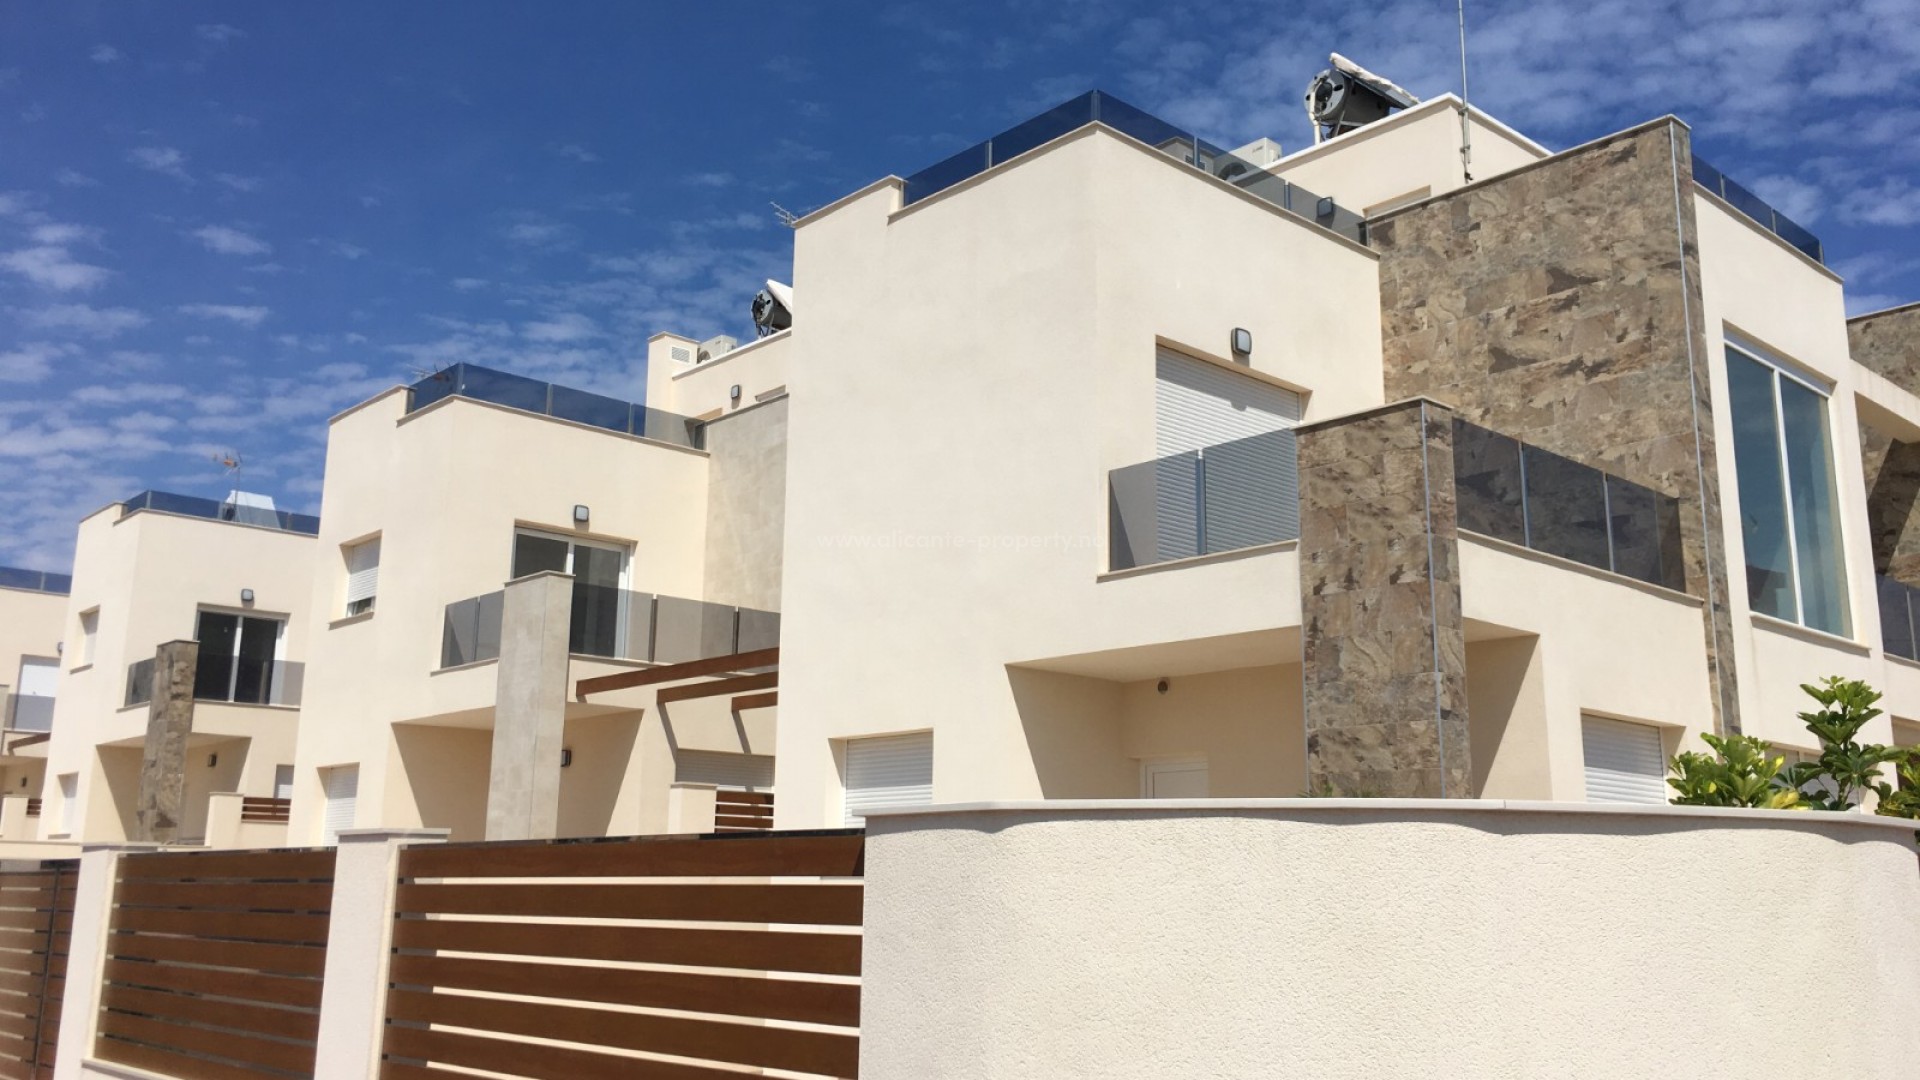 Beautiful villas for sale with sea view, 3 bedrooms, 3 bathrooms, several terraces/solarium, garden with private pool, large basement of 67 m2, 2 min walk to beach